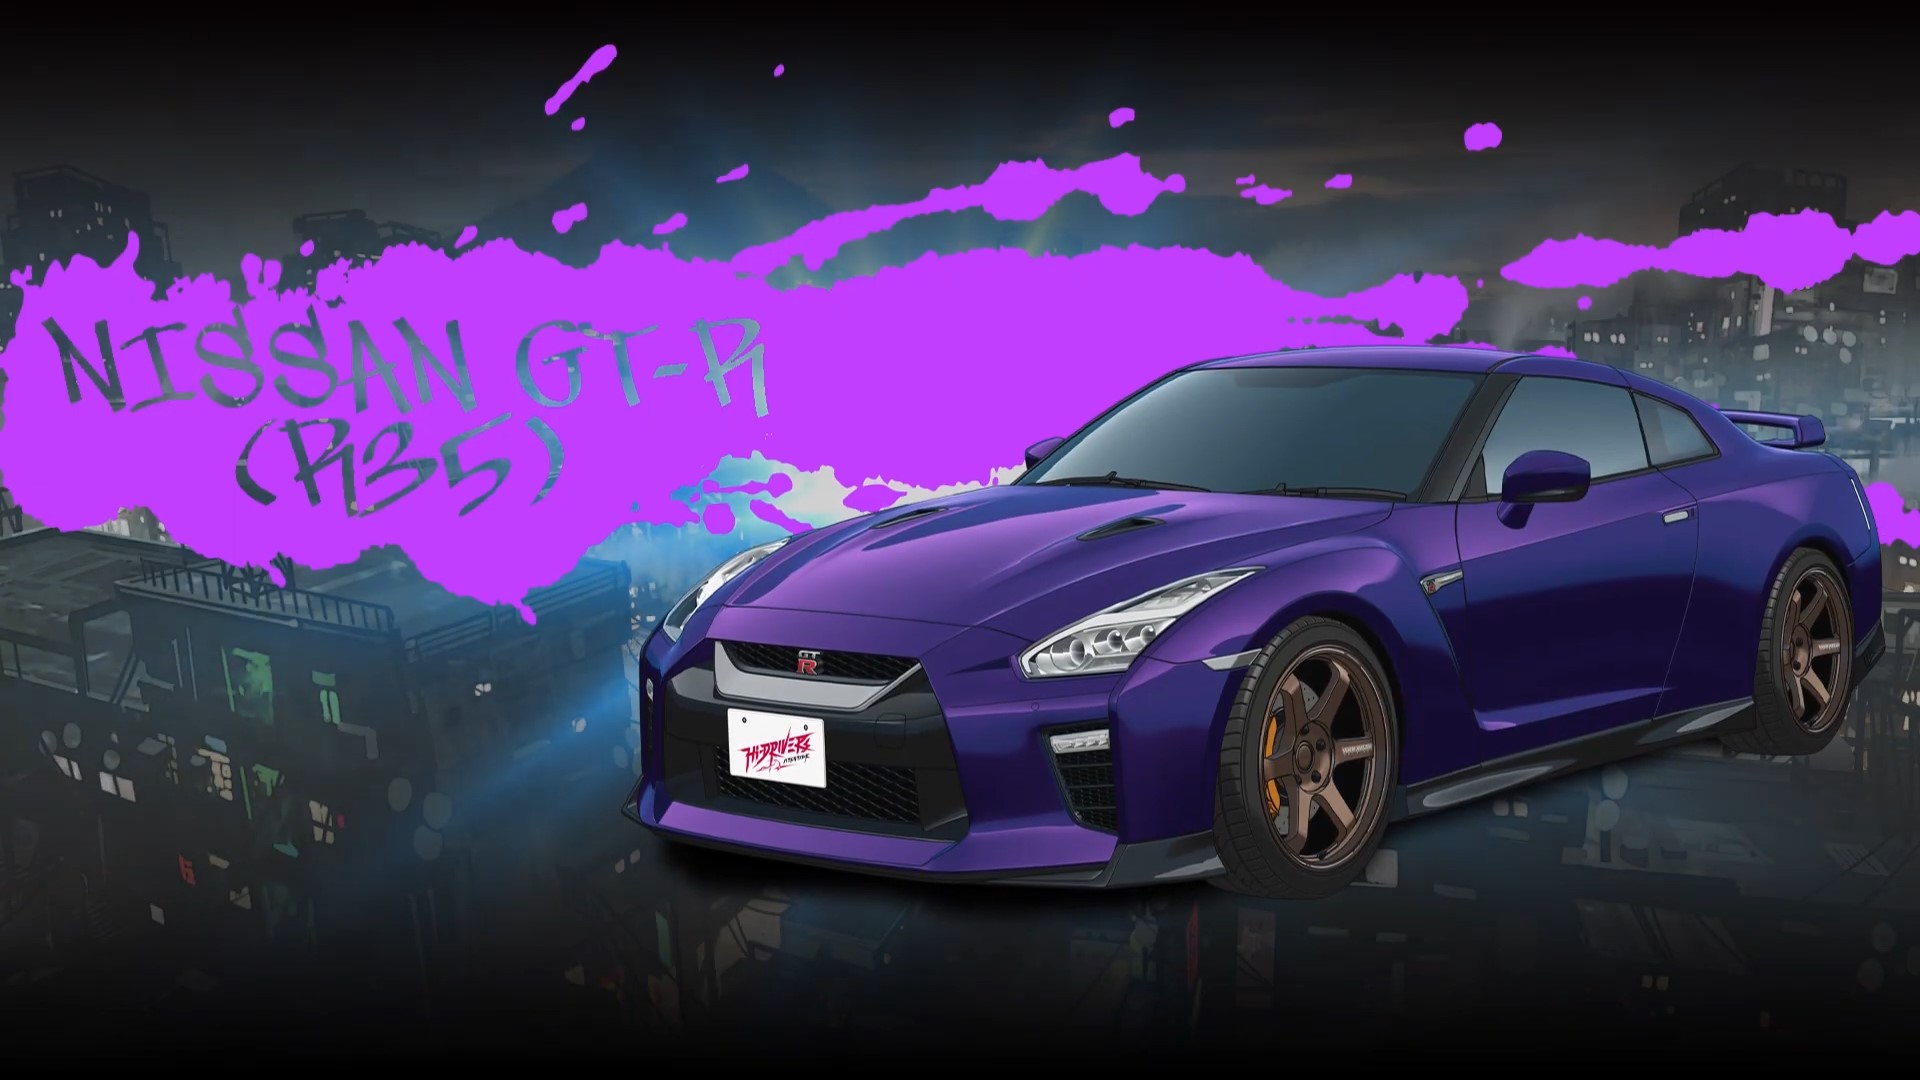 Catsuka  on Twitter Note  HiDRIVERS is a project featuring  fictional characters competing in car races Produced by Sunrise amp  Bandai Namco with Honda Subaru Toyota amp Nissan  httpstcohMdnDbF5D4 httpstco288ucPvUa5 